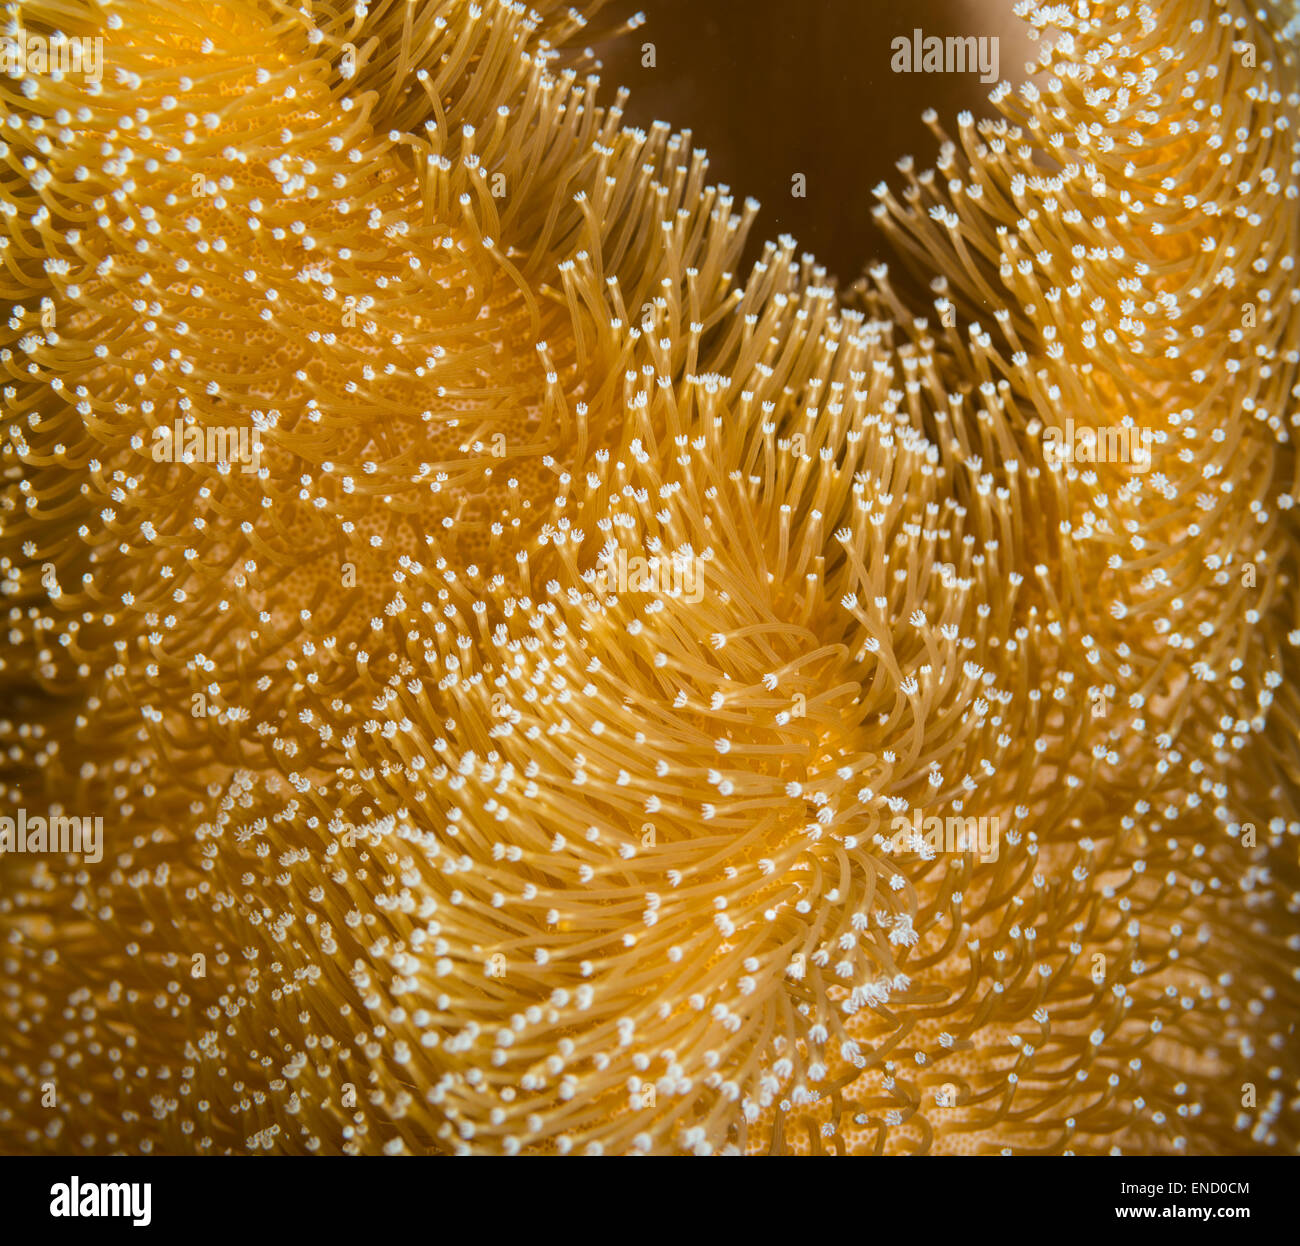 Abstract of a yellow leather coral Stock Photo